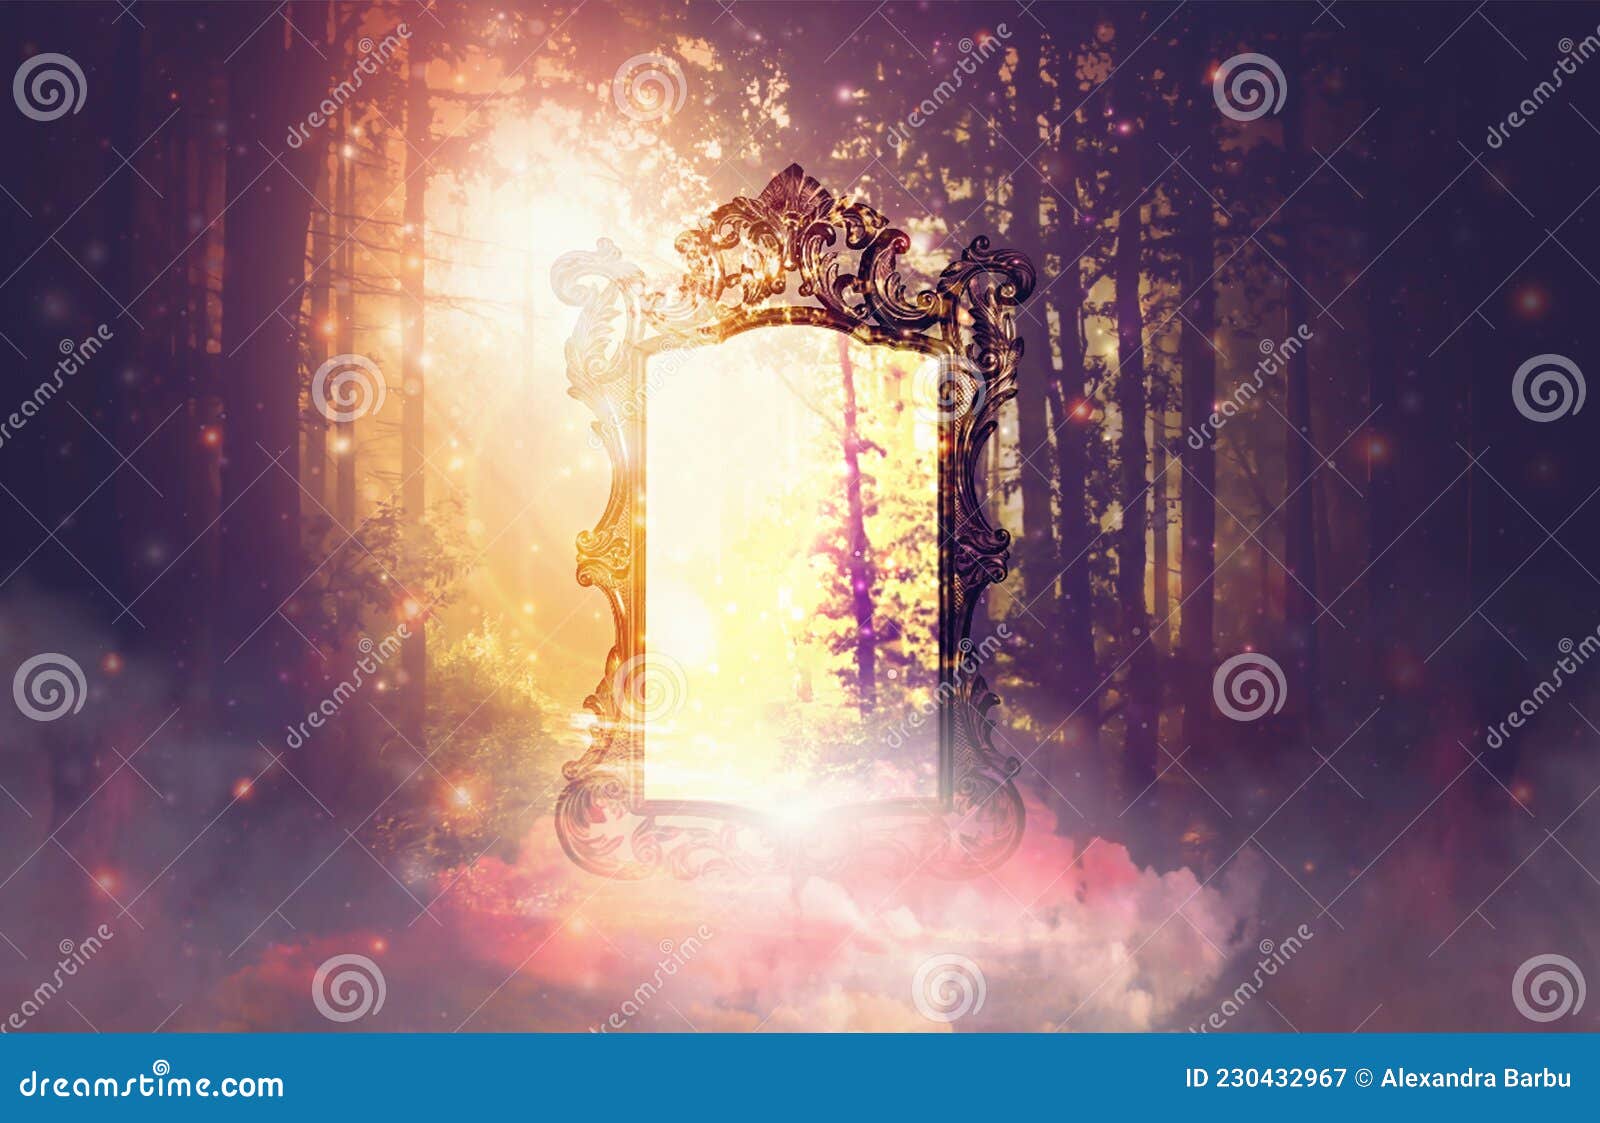 magical glowing light in the enchanted forest, mirror like a portal, spirit world